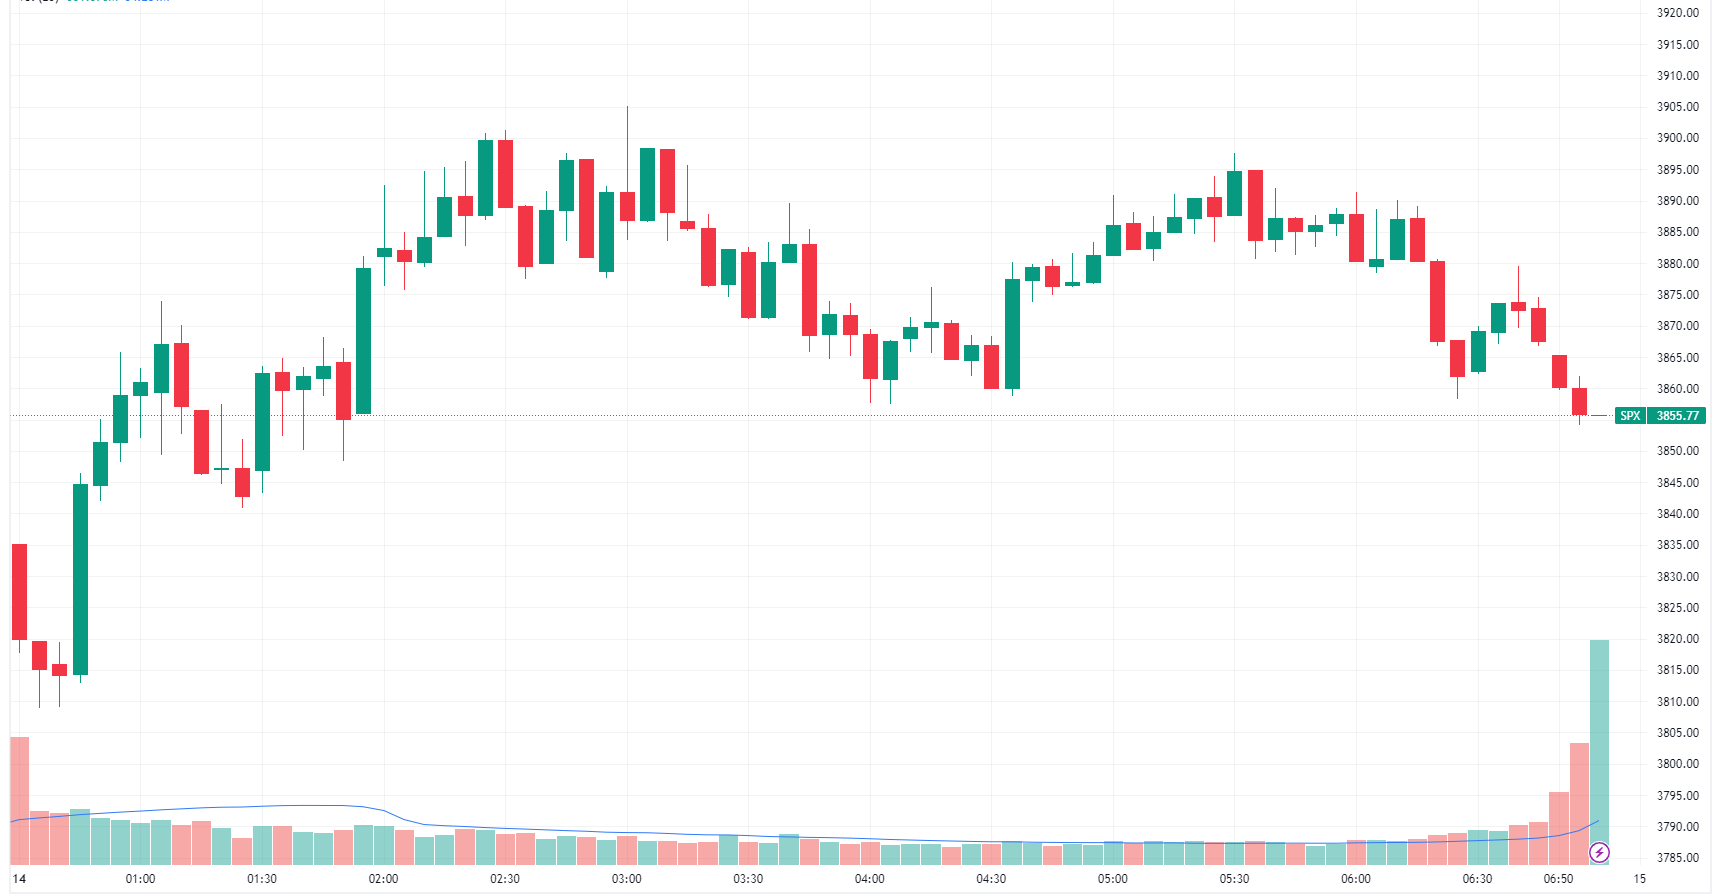 S&P 500 closes in between session highs and lows (Source: TradingView)